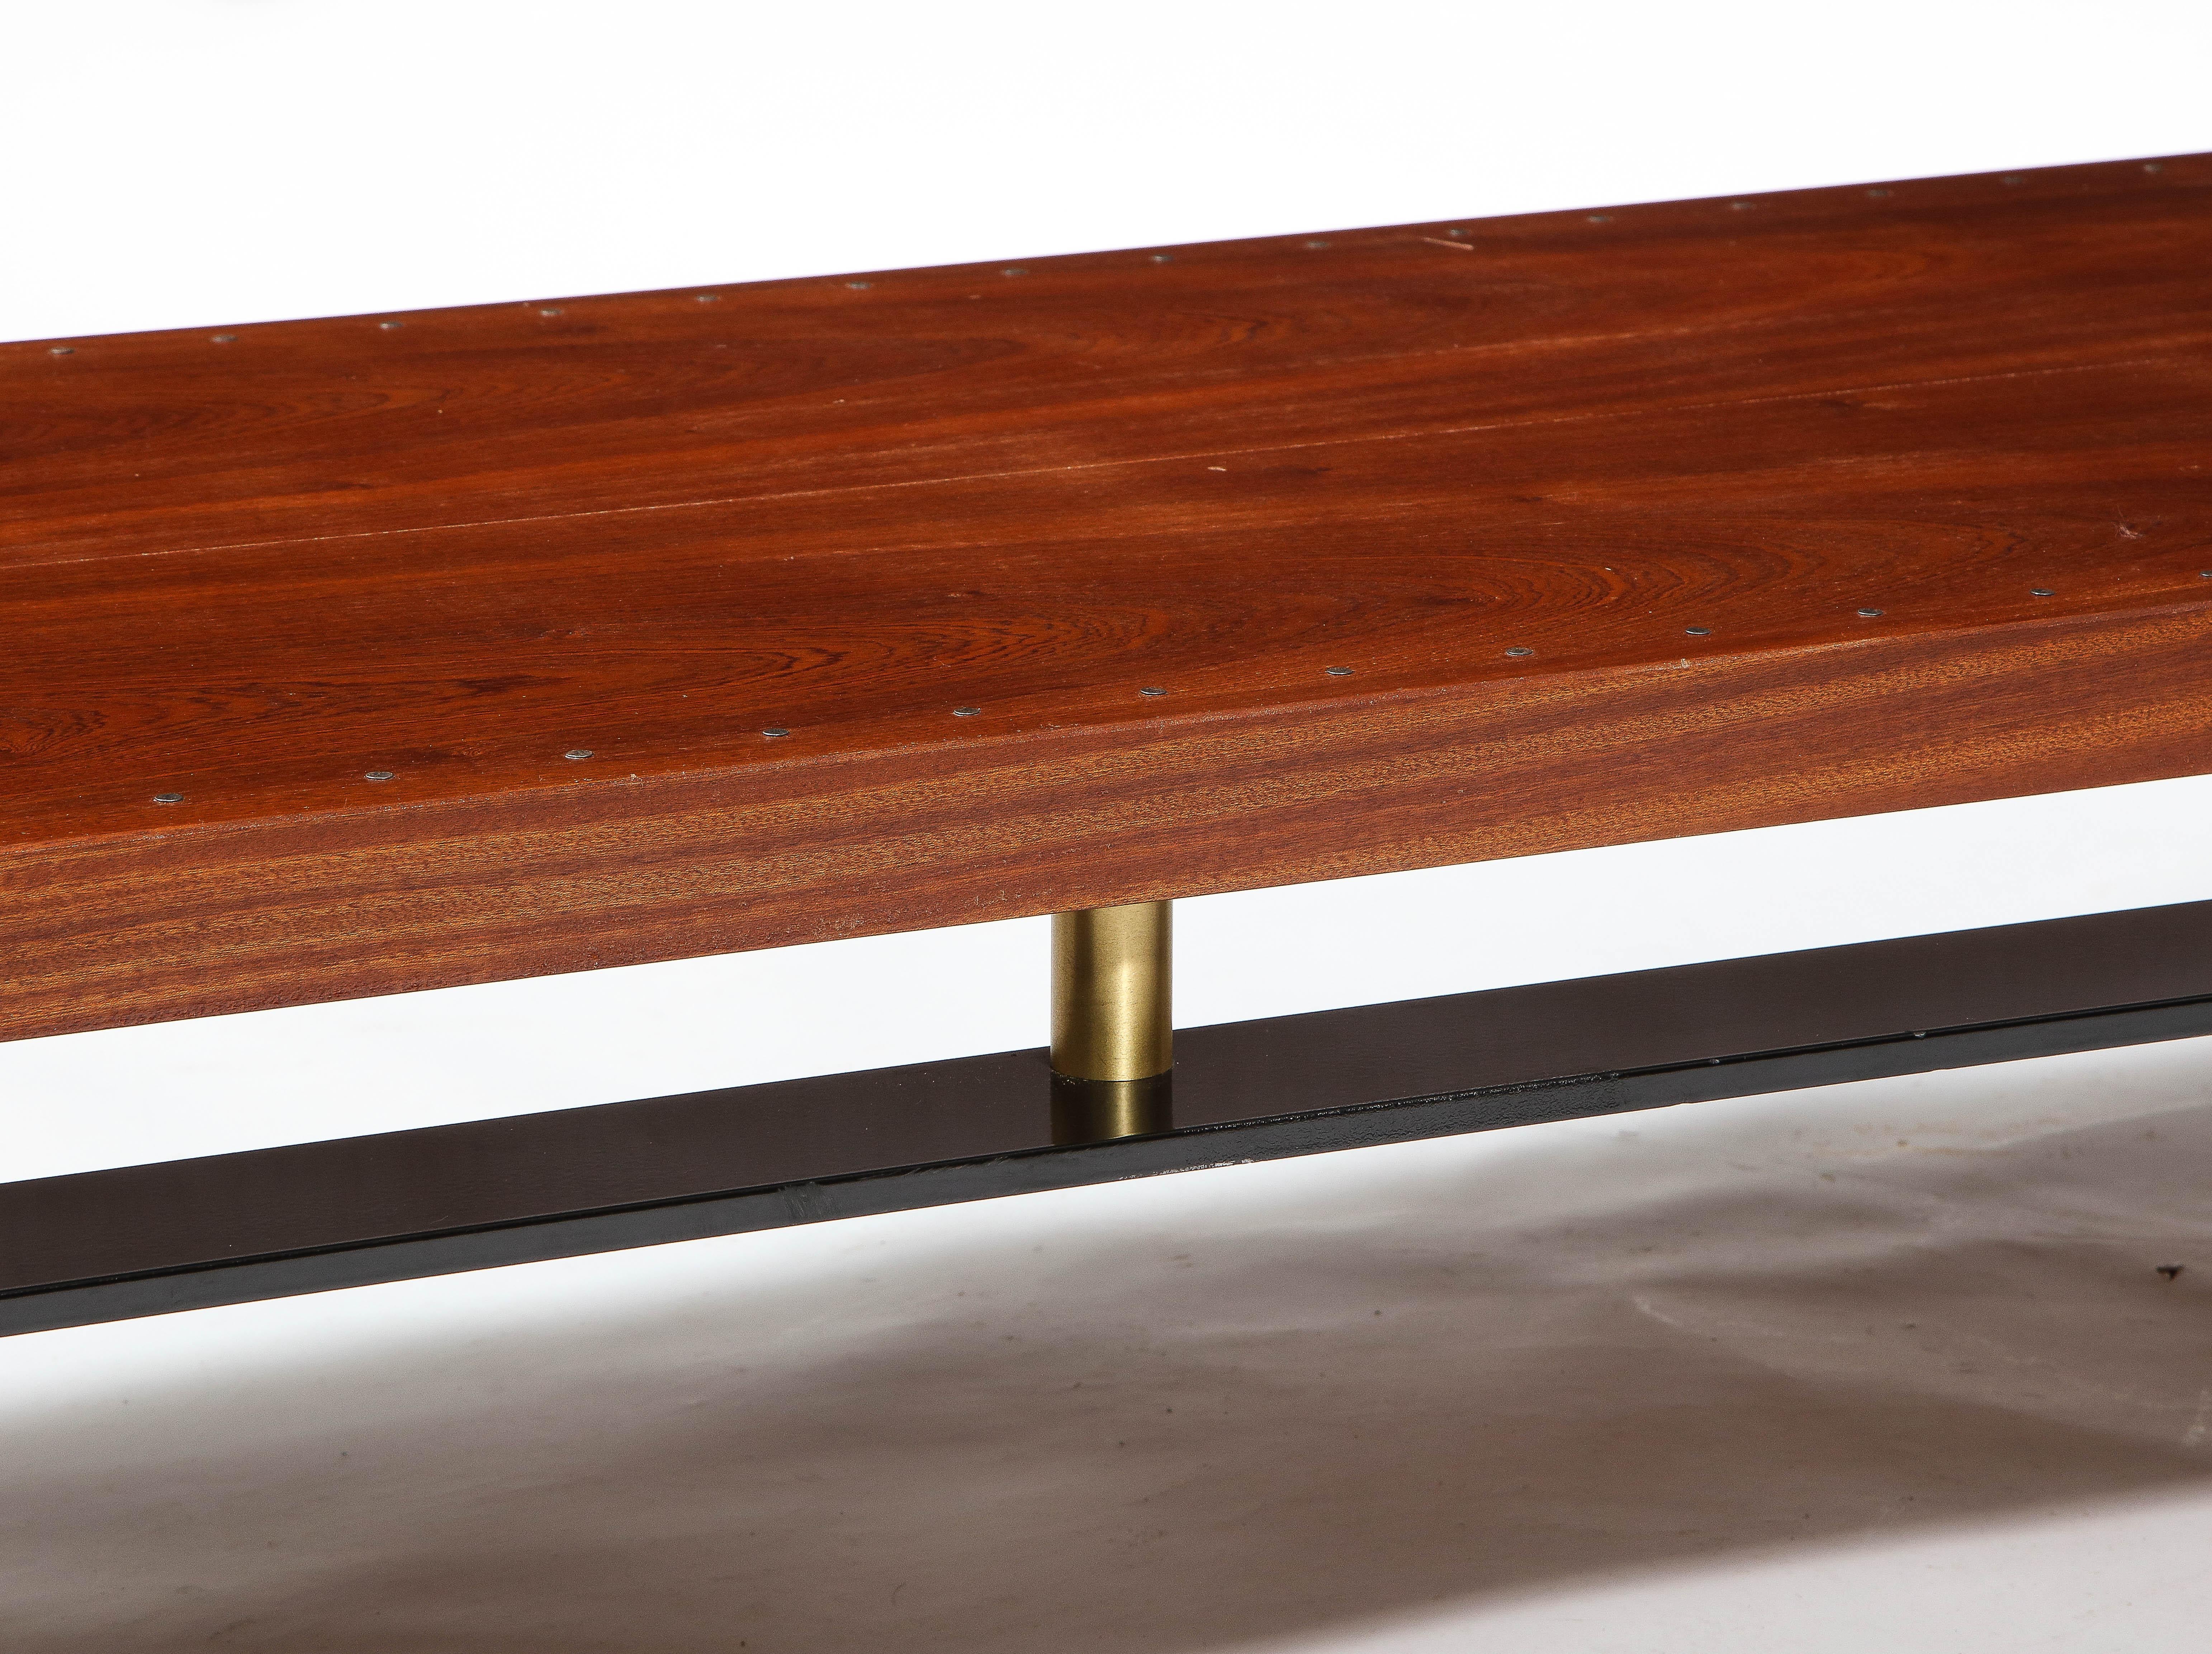 Large Long Low Modernist Steel & Walnut Coffee Table, France 1970's For Sale 3